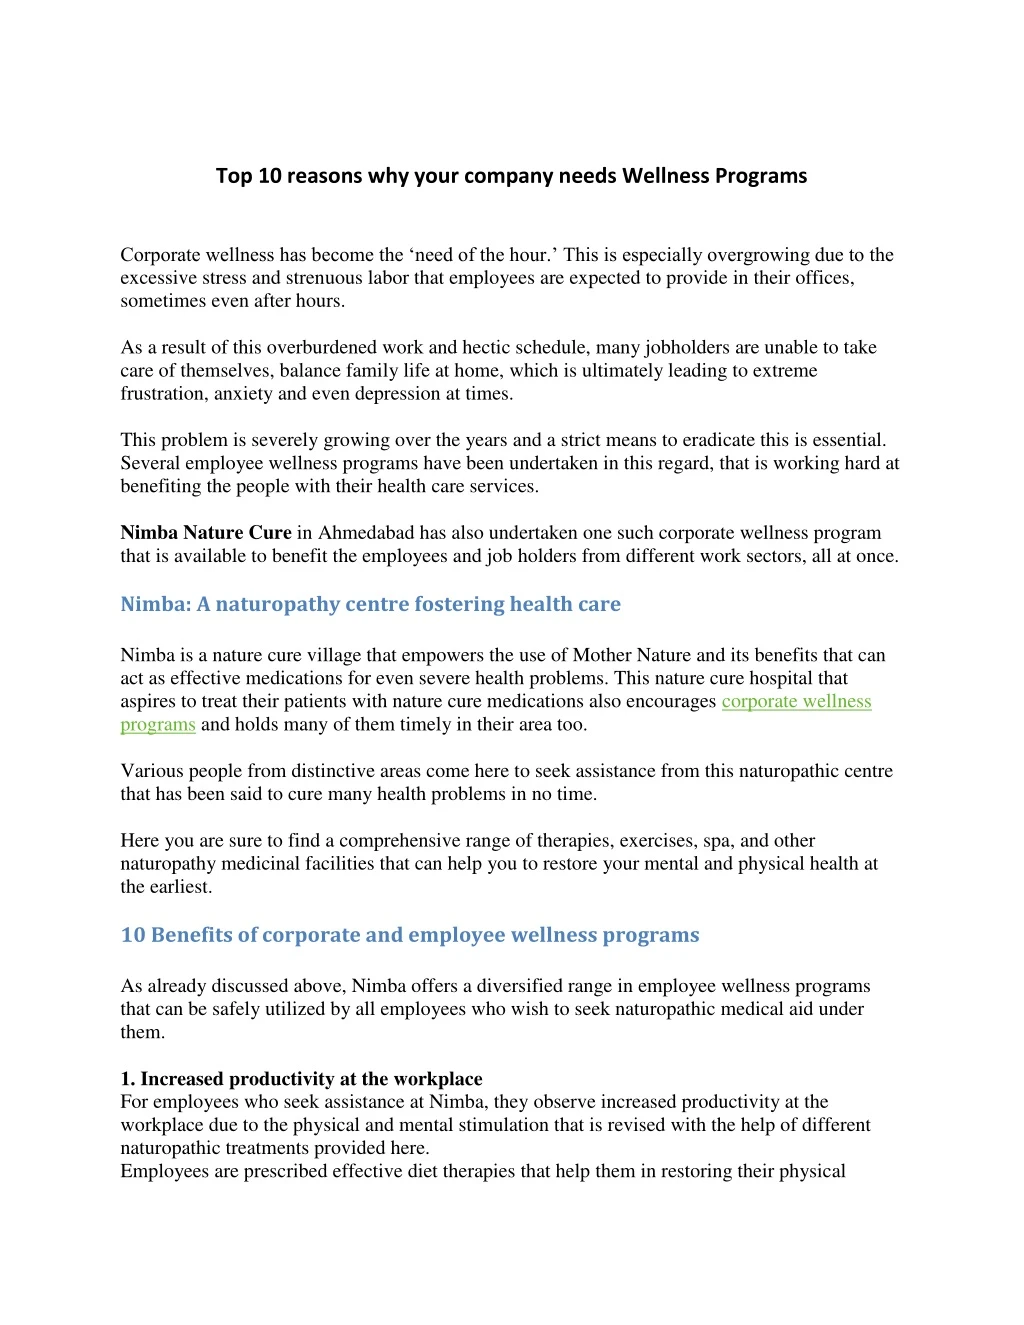 top 10 reasons why your company needs wellness